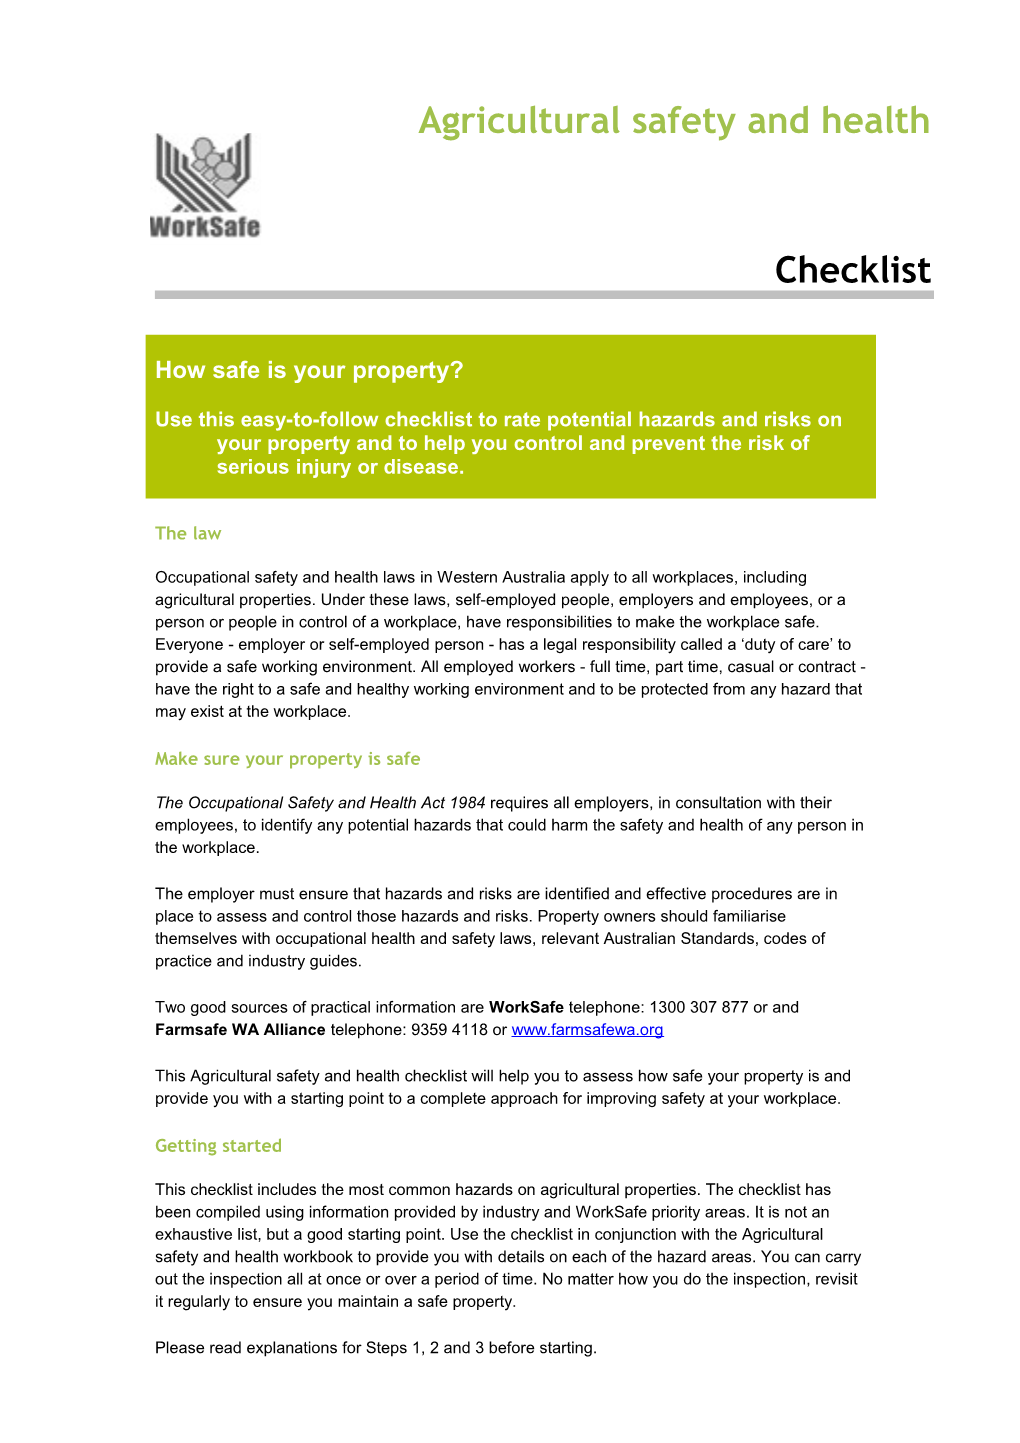 Agricultural Safety and Health Checklist